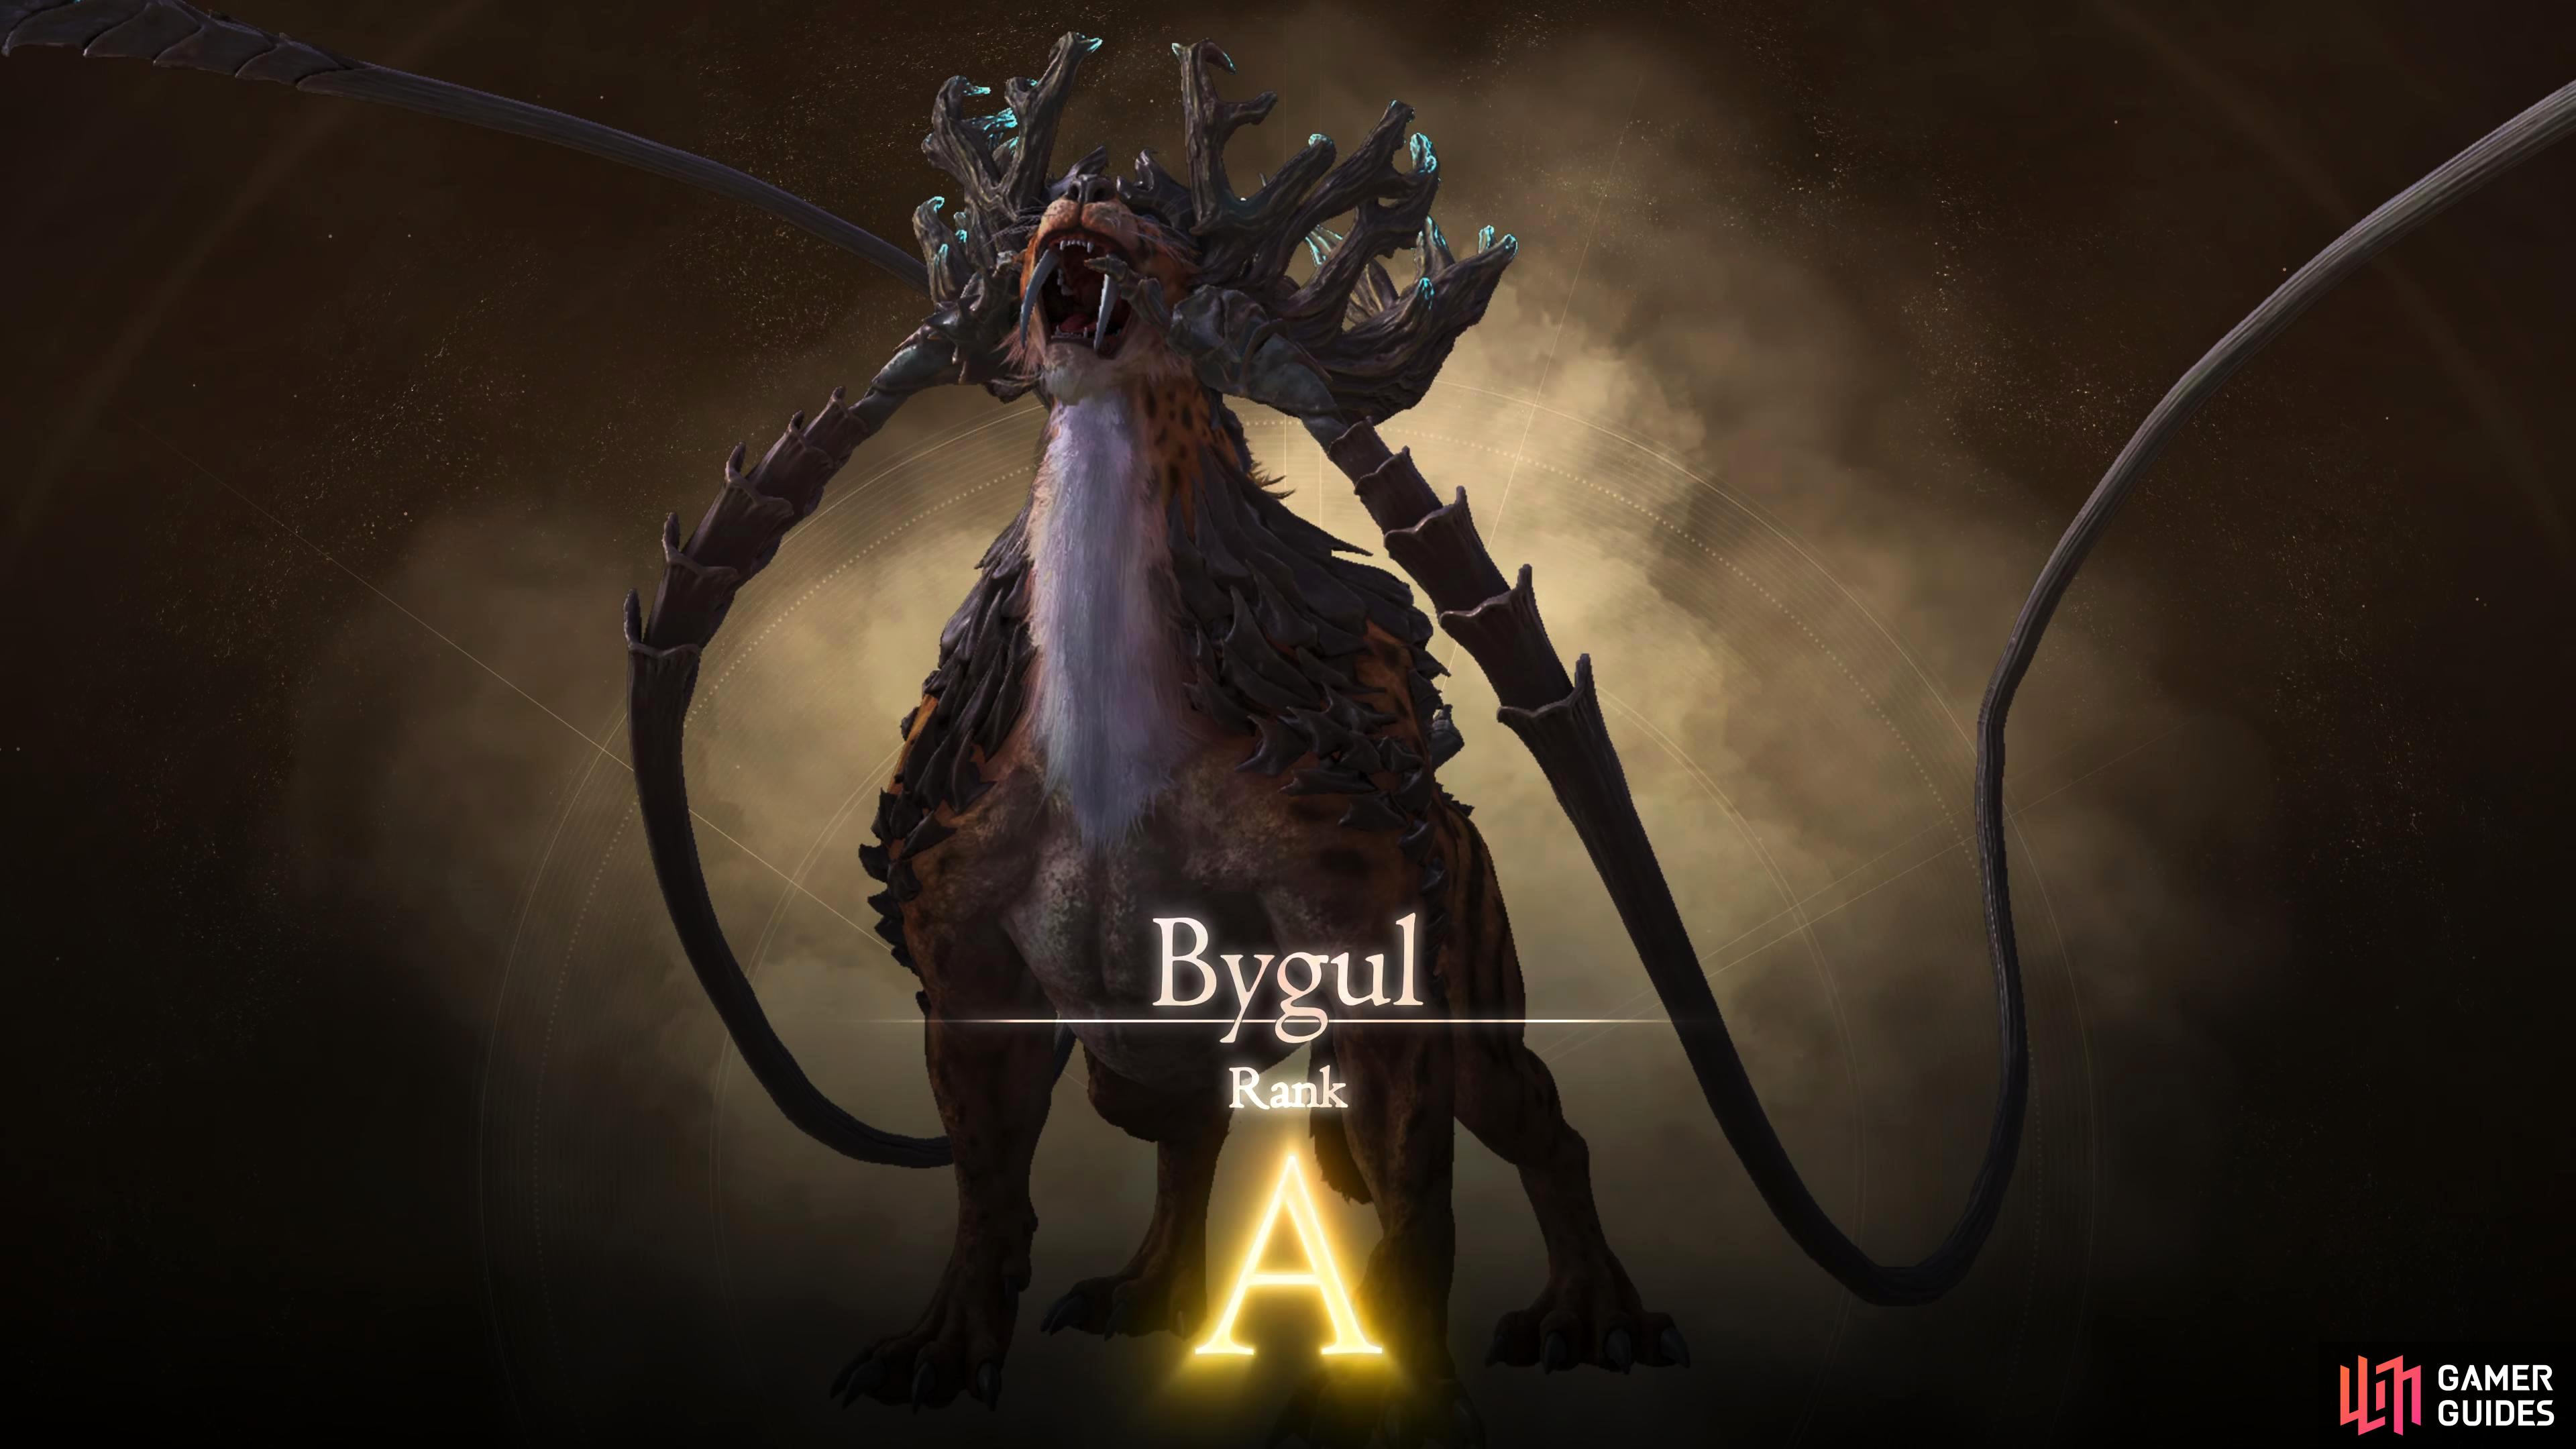 Bygul can be accessed during the Brotherhood main scenario quest.